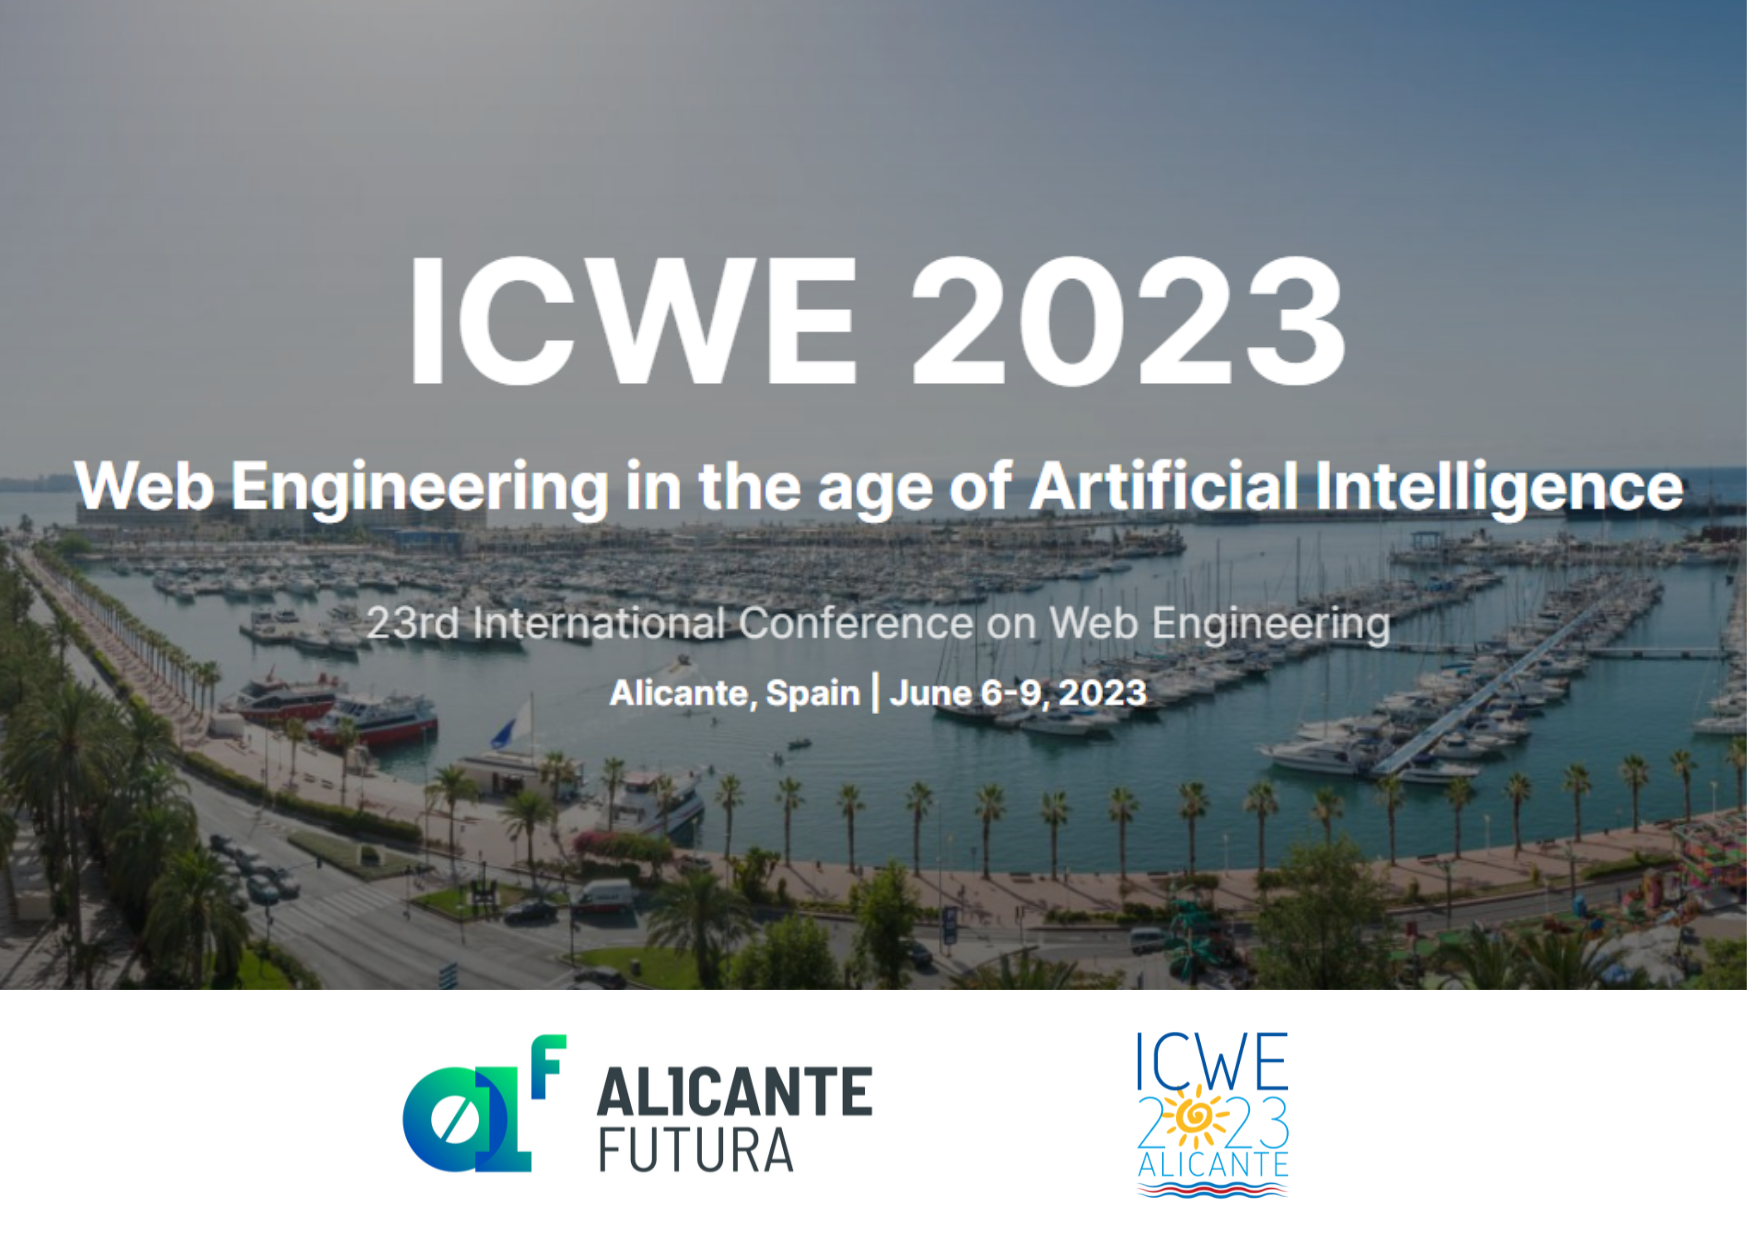 International Conference on Web Engineering (ICWE) 2023 to be held in Alicante, Spain